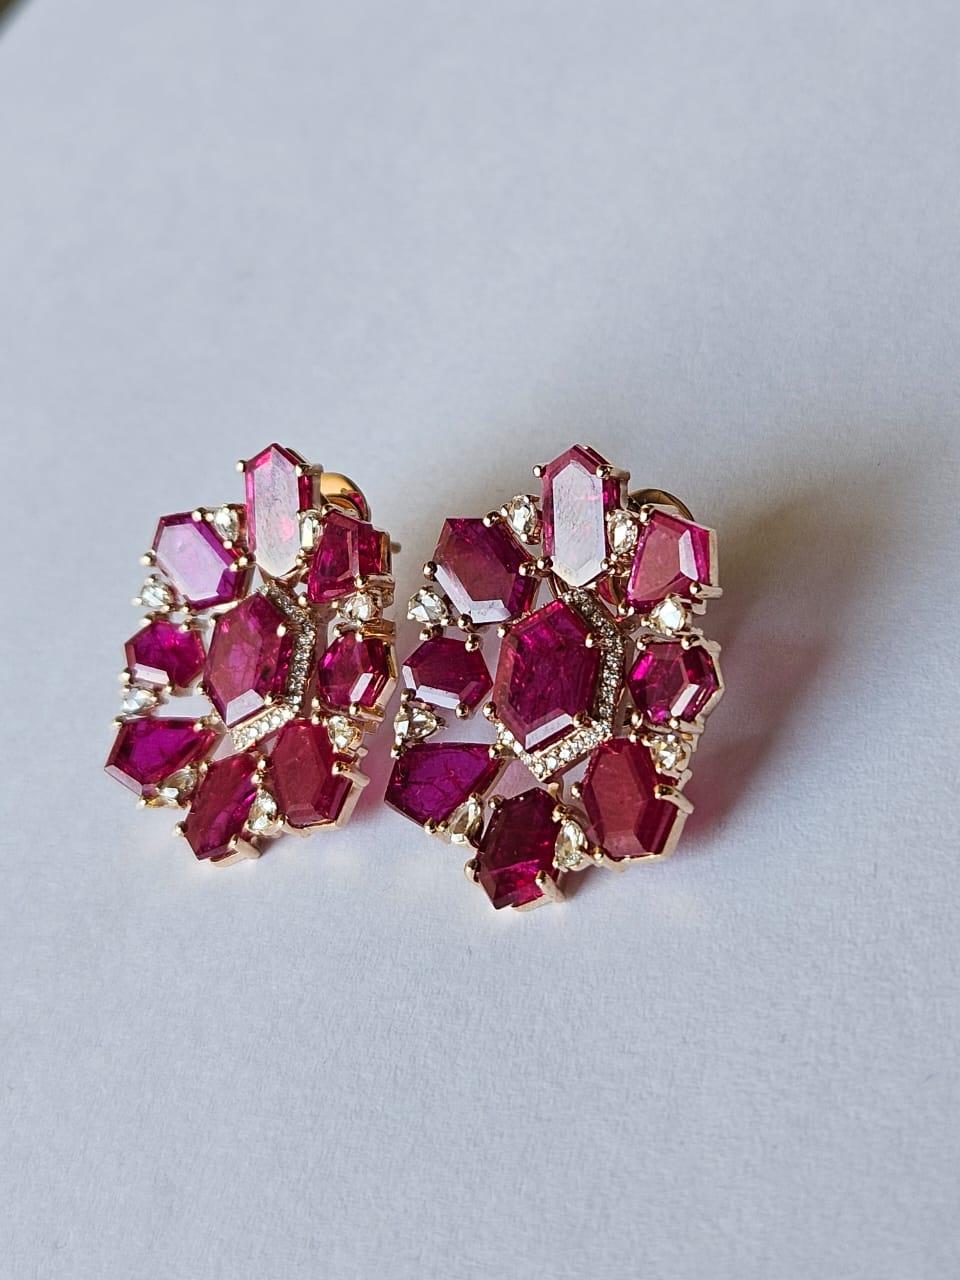 Shield Cut Set in 18K Gold, 21.78 carats, natural Mozambique Ruby & Diamonds Stud Earrings